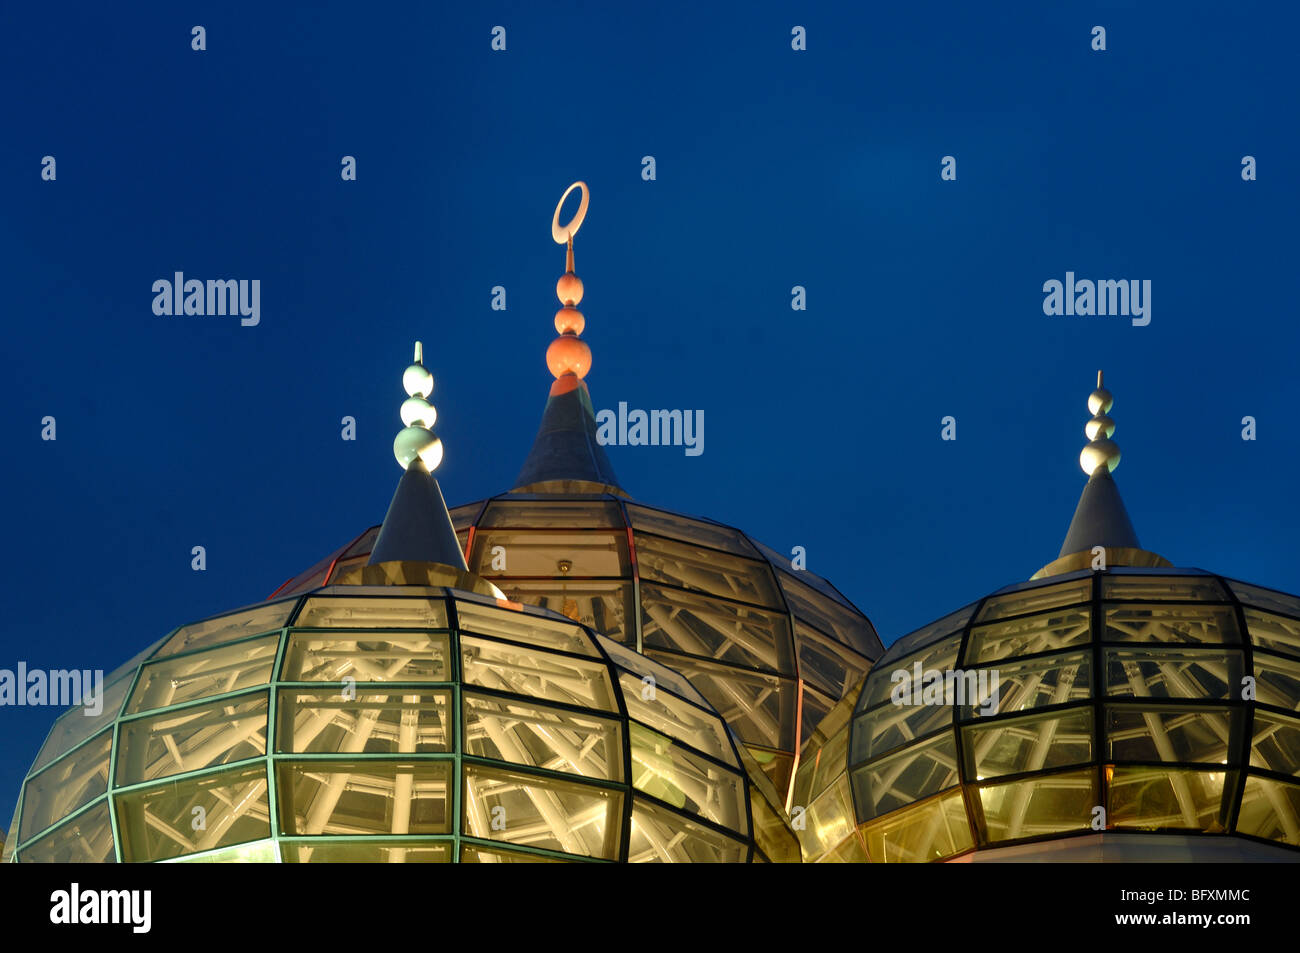 Transparent Lit Glass Domes of the All-Glass Crystal Mosque, or Masjid Kristal, at Night, Kuala Terengganu, Malaysia Stock Photo